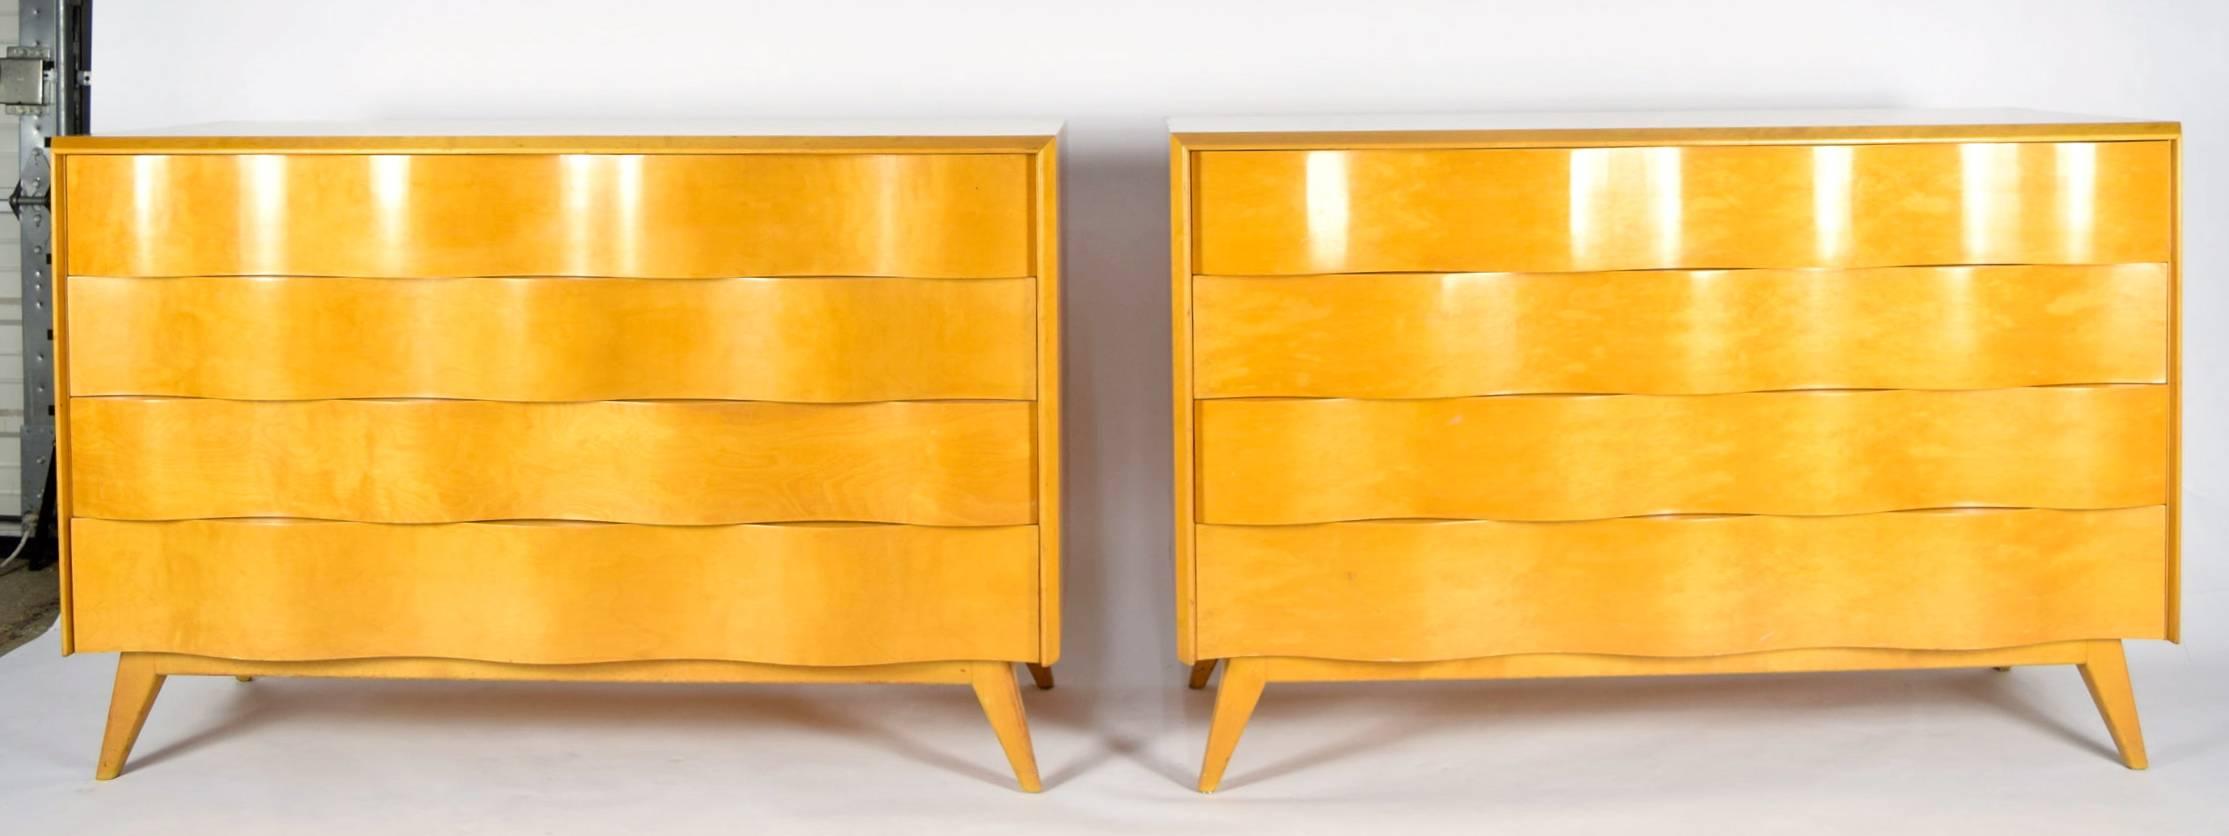 Beautiful pair of chests by Edmond Spence. Gorgeous wavy front with four drawers each and plenty of storage. We are able to lacquer these in any color desired or leave in their natural finish.